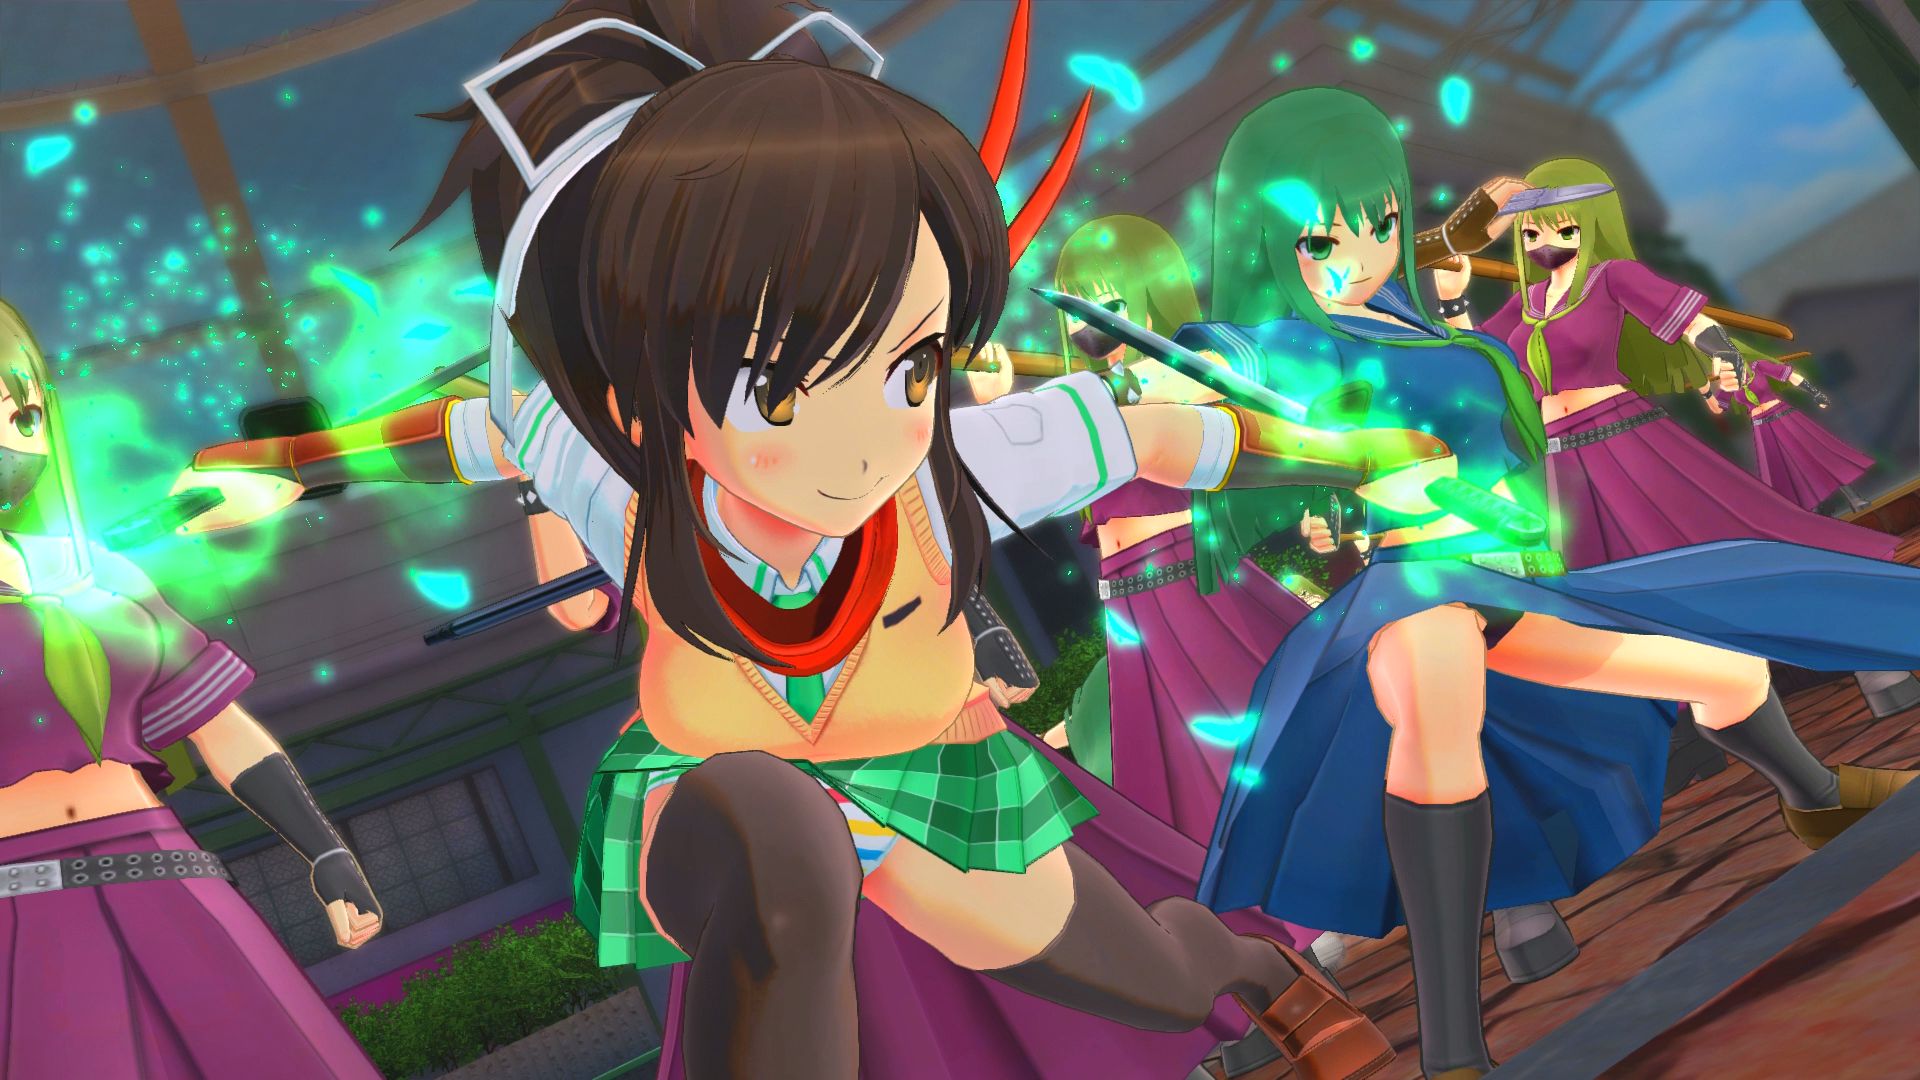 Image for Intimacy Mode removed from PS4 version of Senran Kagura Burst Re:Newal